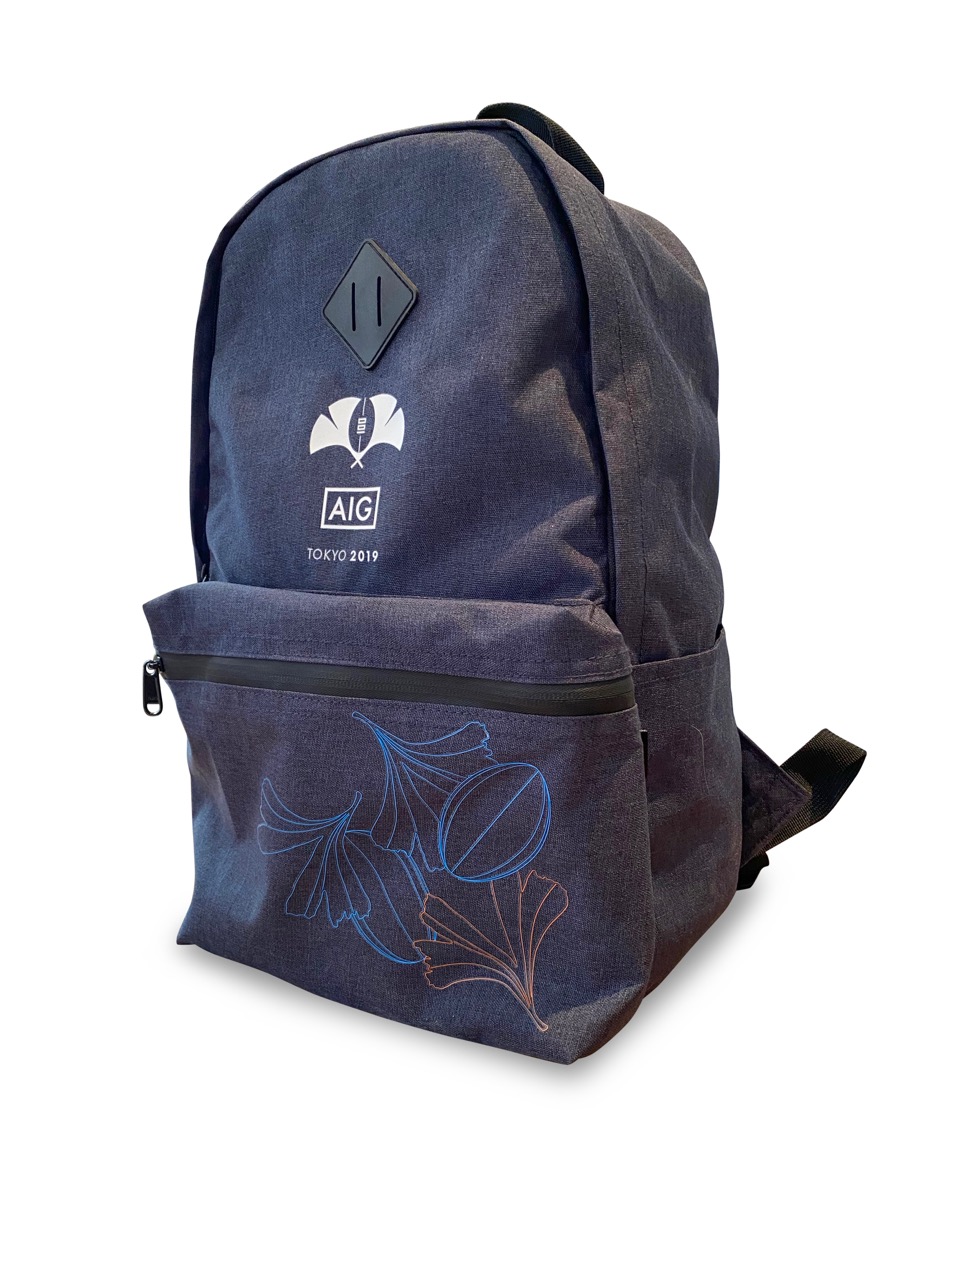 AIG RWC Merch and Apparel Withers and co Backpack v2